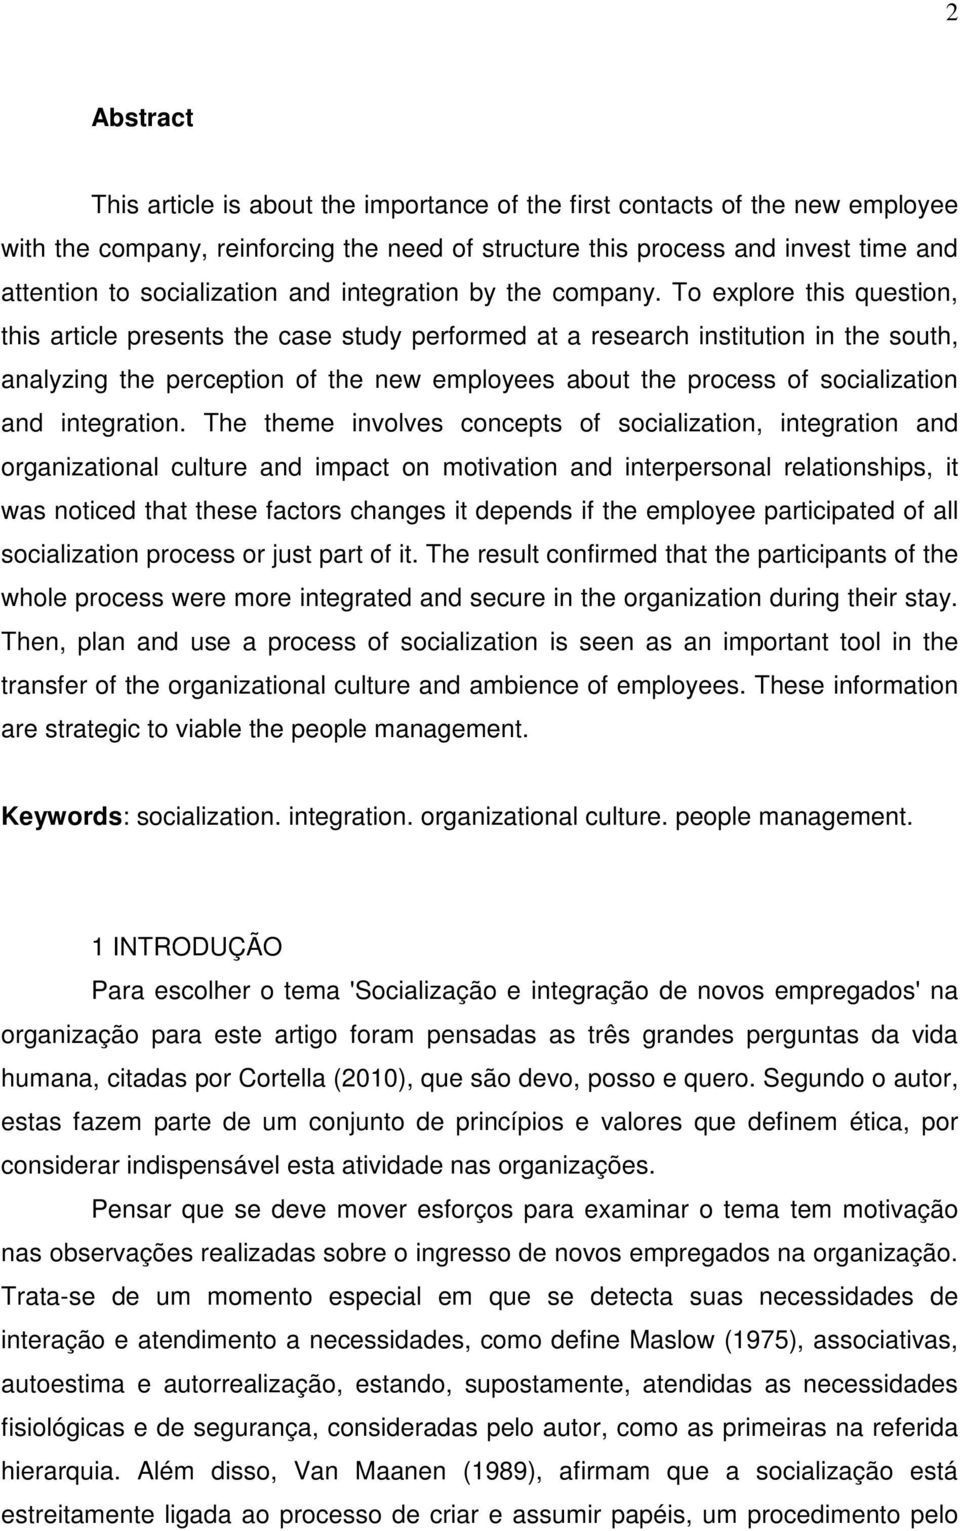 To explore this question, this article presents the case study performed at a research institution in the south, analyzing the perception of the new employees about the process of socialization and